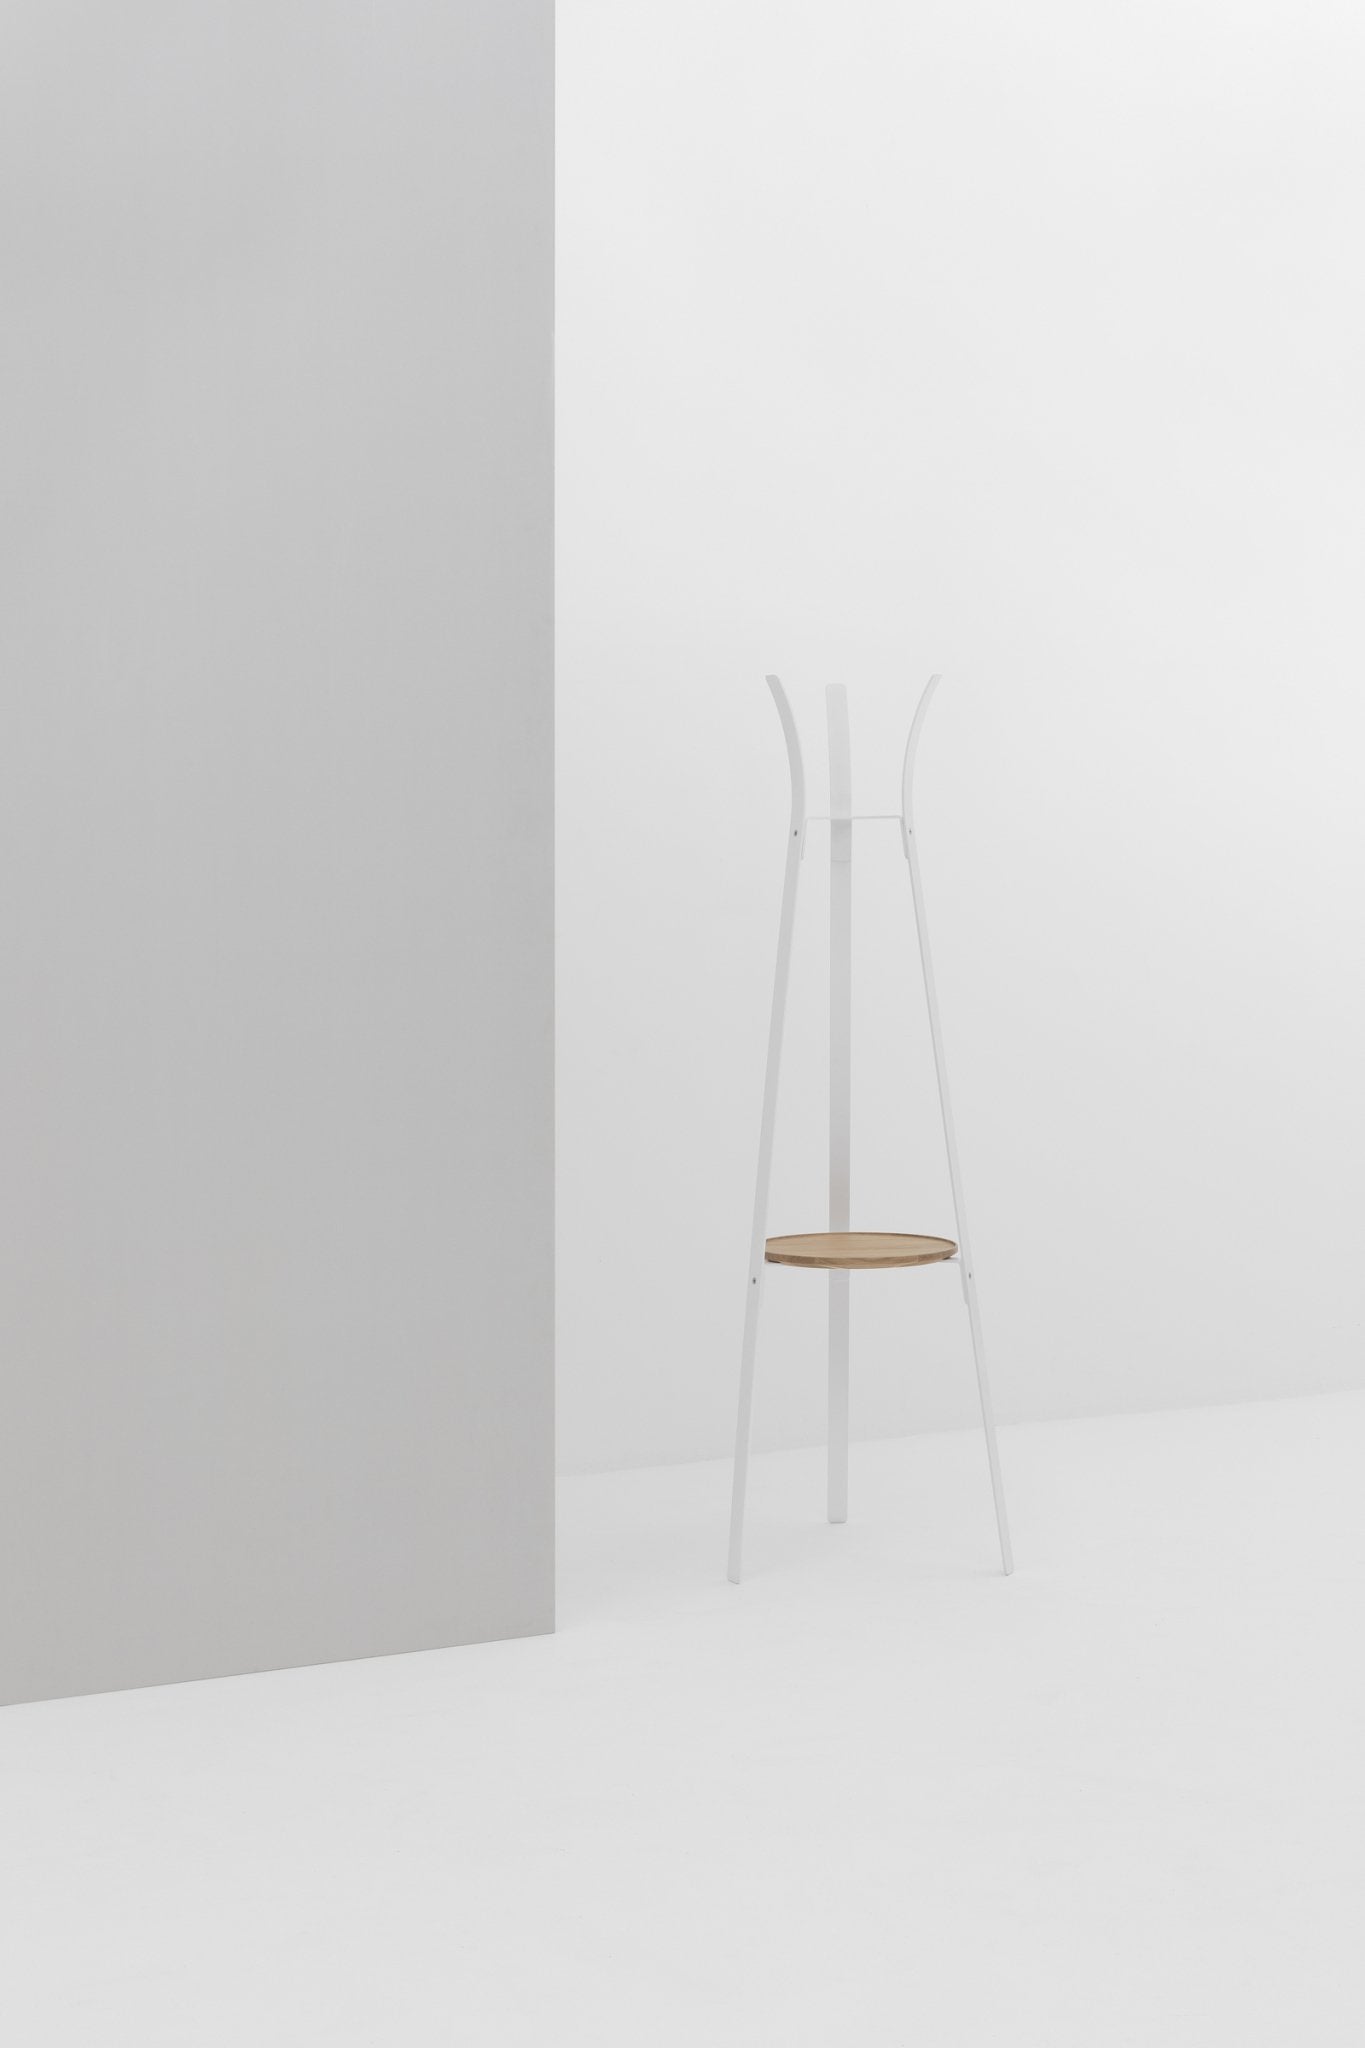 SPRINGBACK coat stand